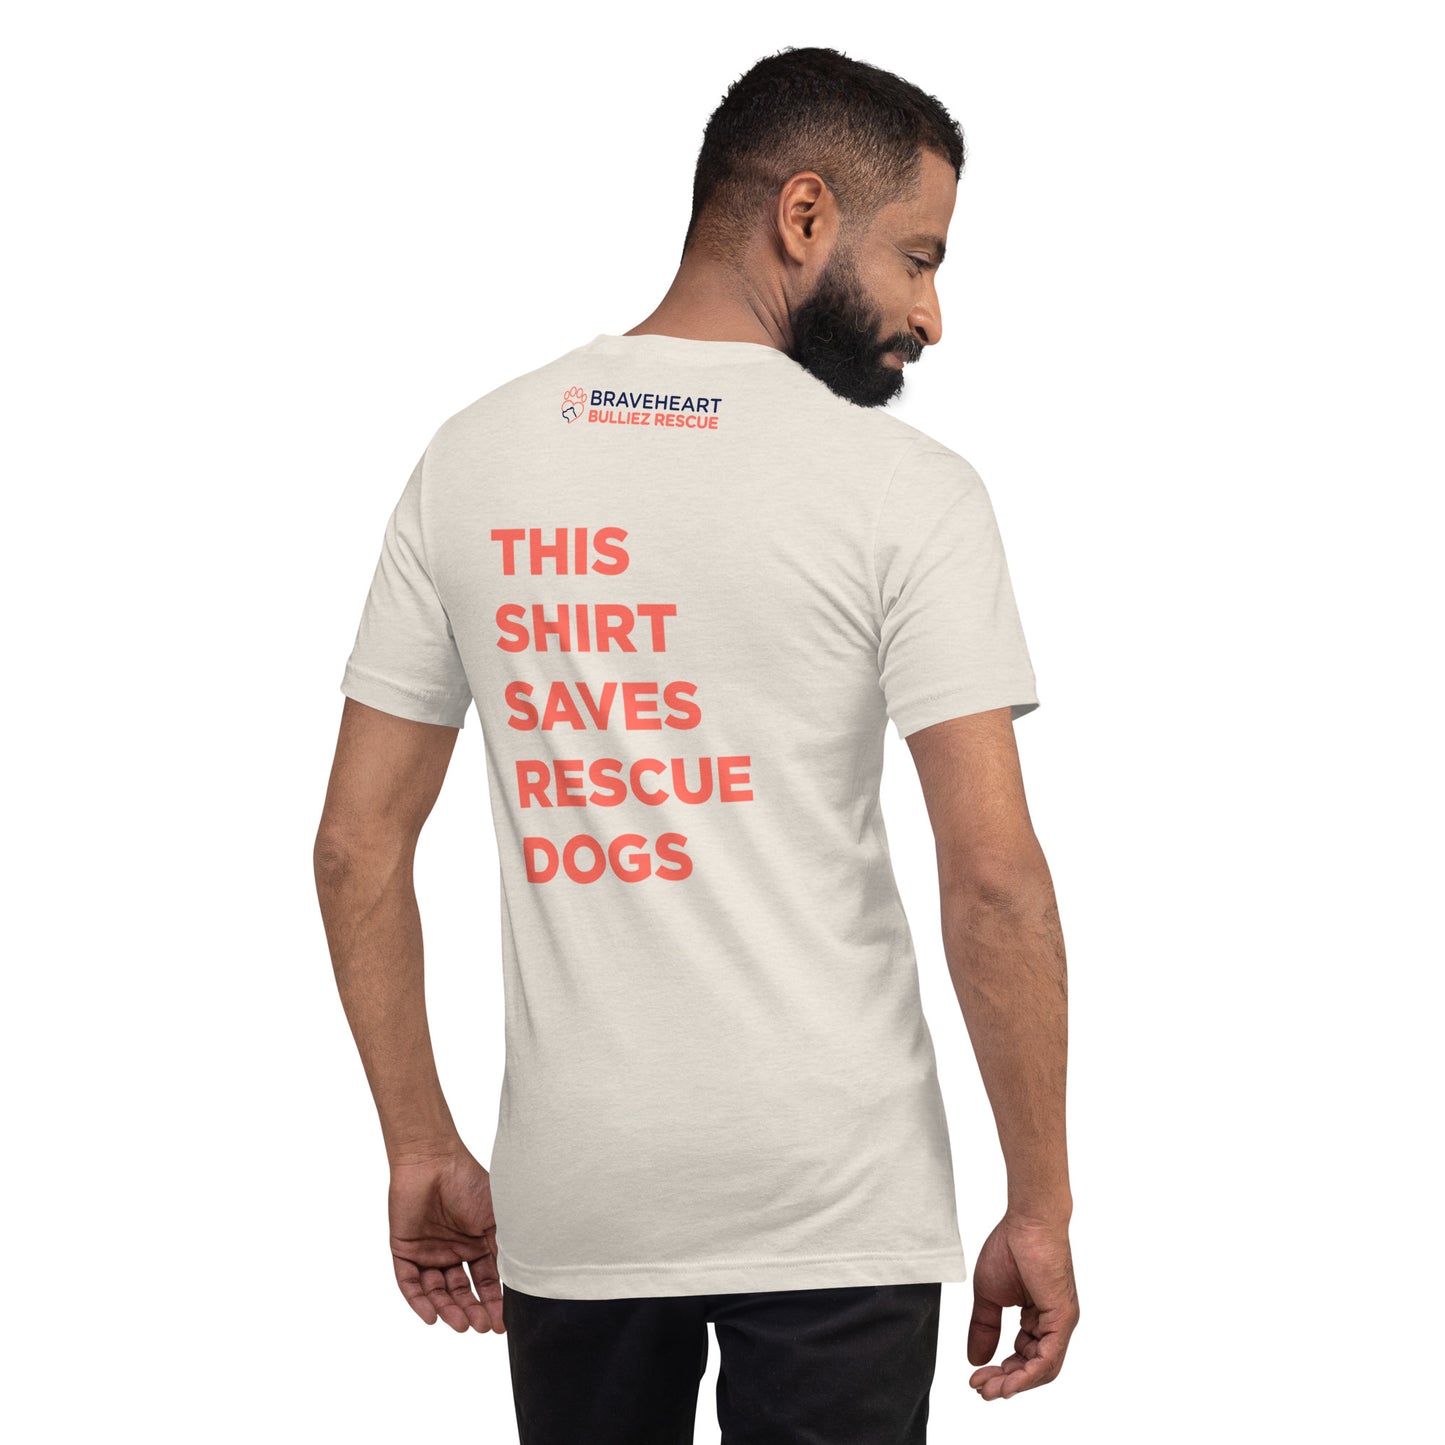 'This Shirt Saves Rescue Dogs' Tee